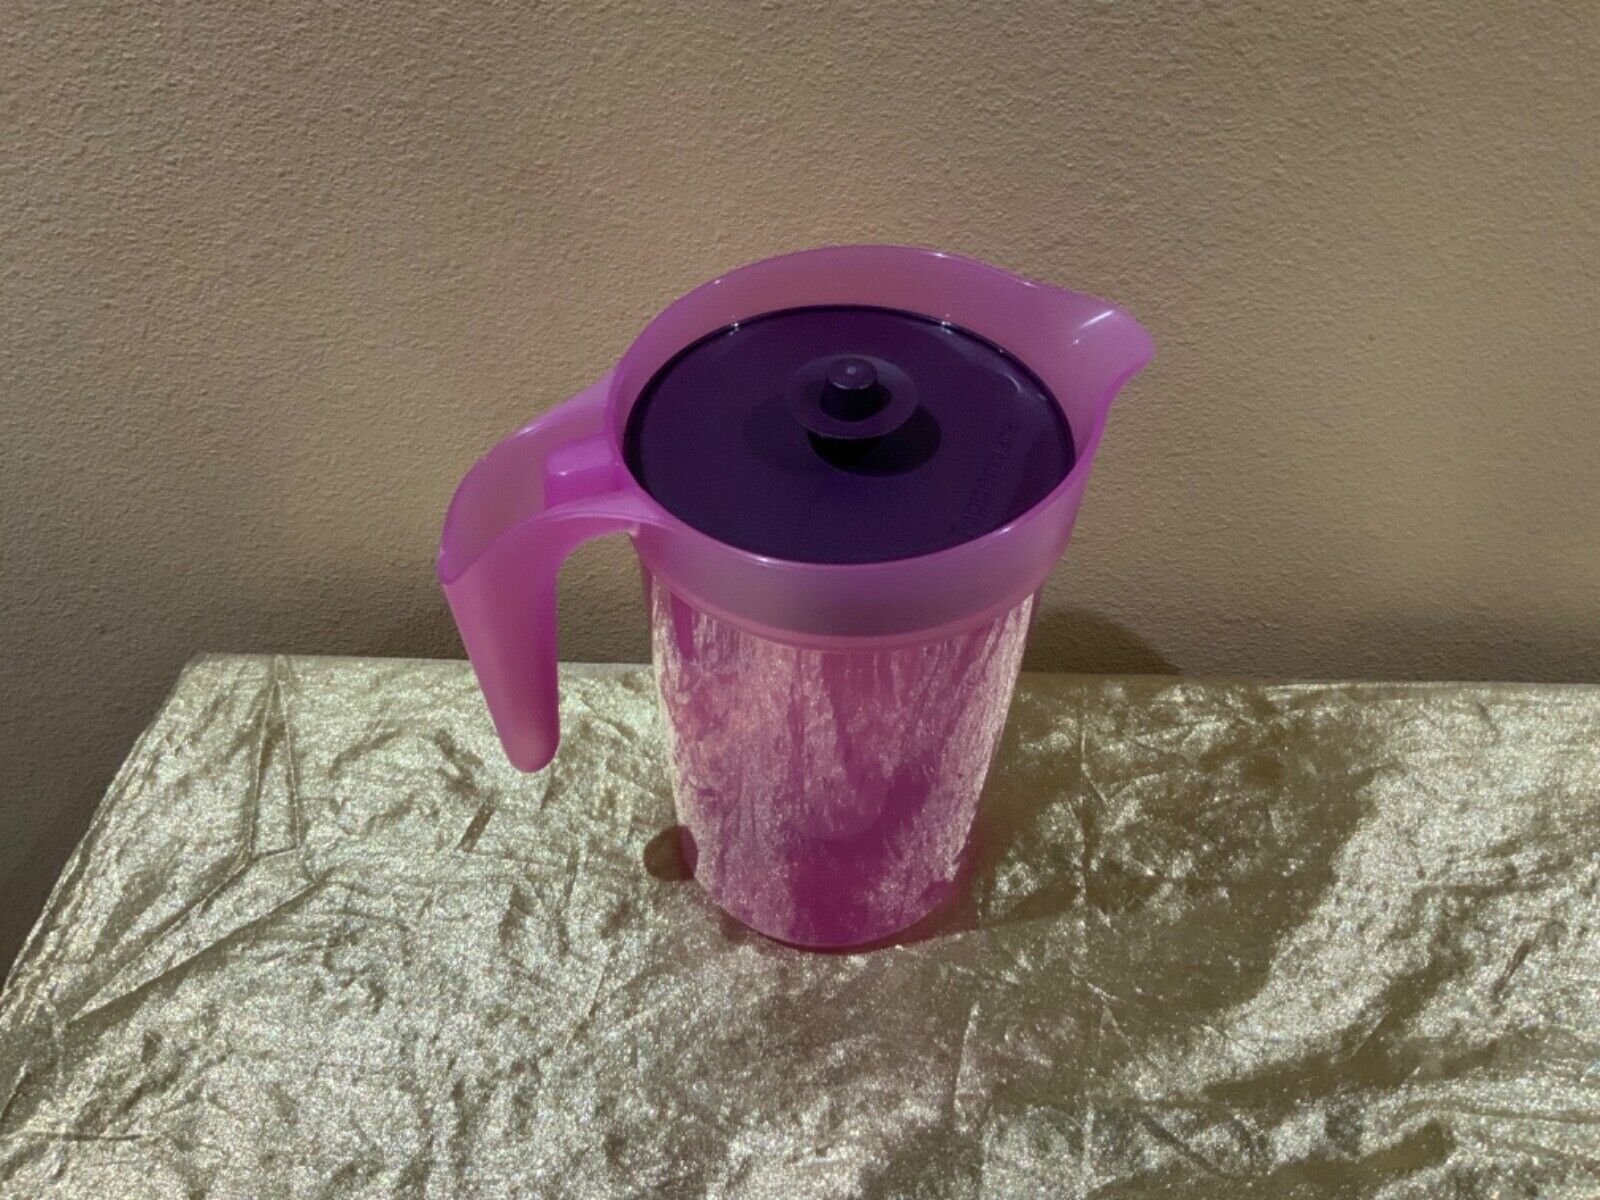 New Tupperware Beautiful Pitcher with Infuser 2L with 2 tone Purple/Plum Color